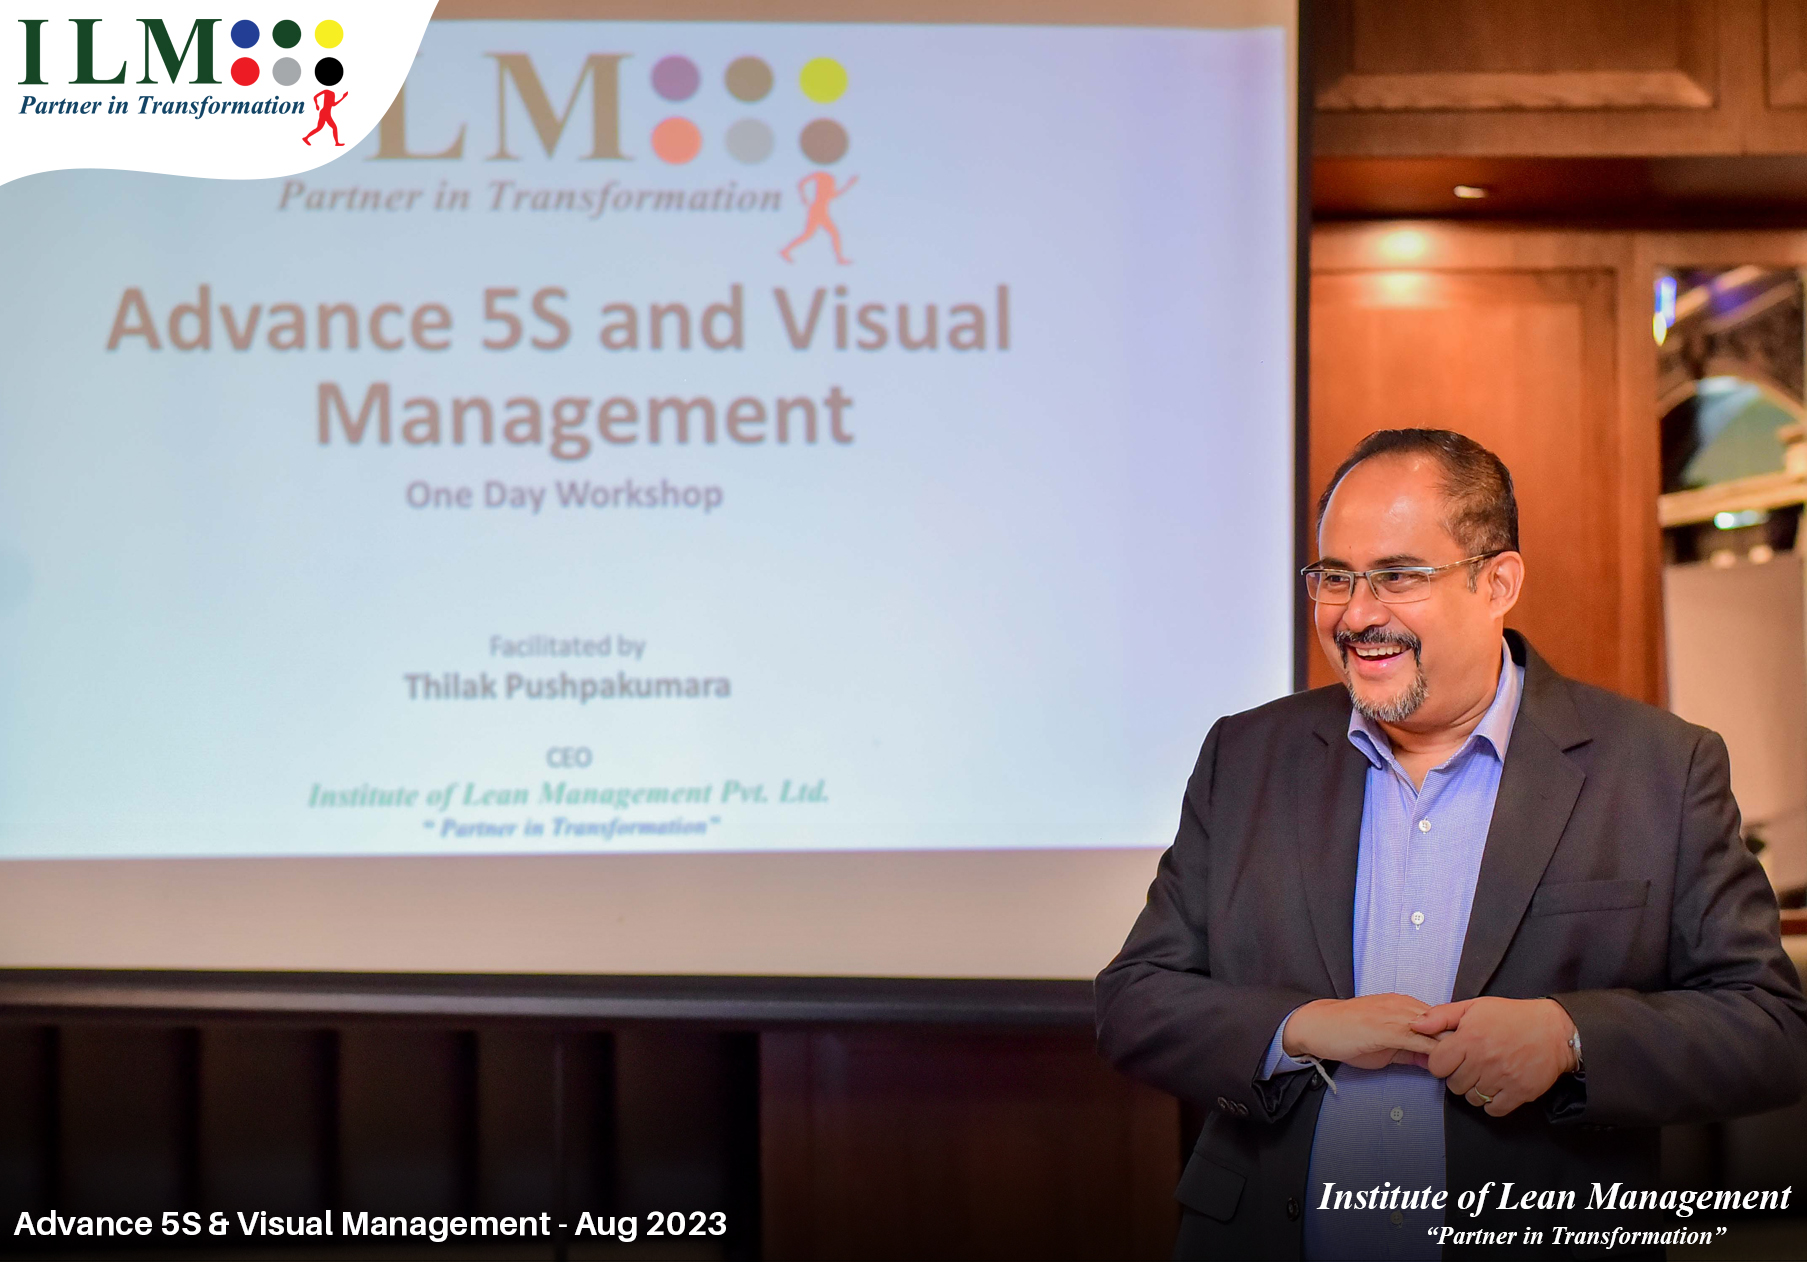 Advance 5S & Visual Management - One day workshop